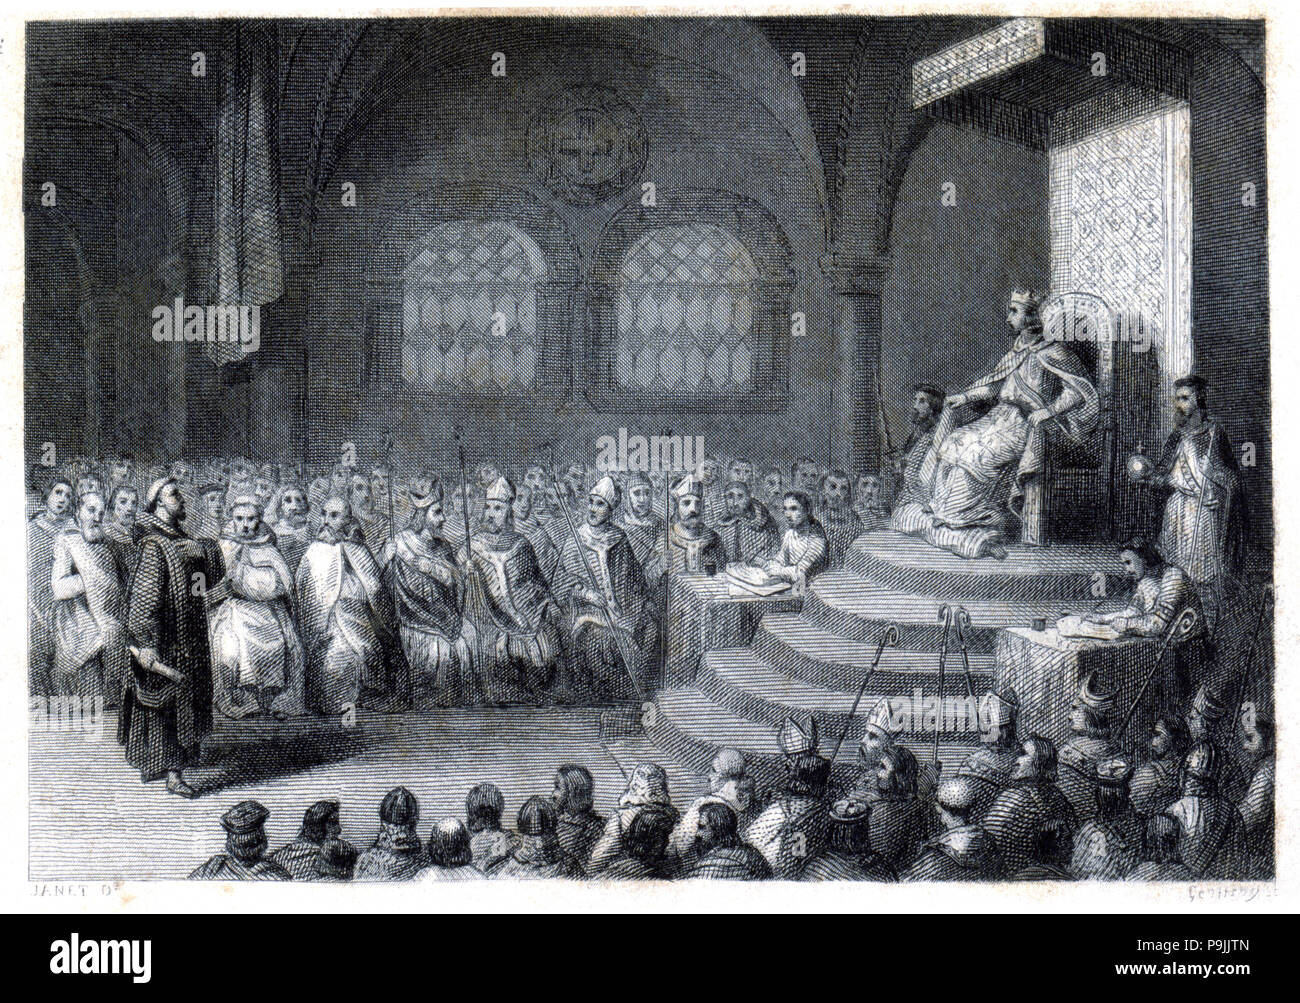 16th or 17th Toledo Council (693-694) held during the reign of King Égica (687-702), engraving by… Stock Photo